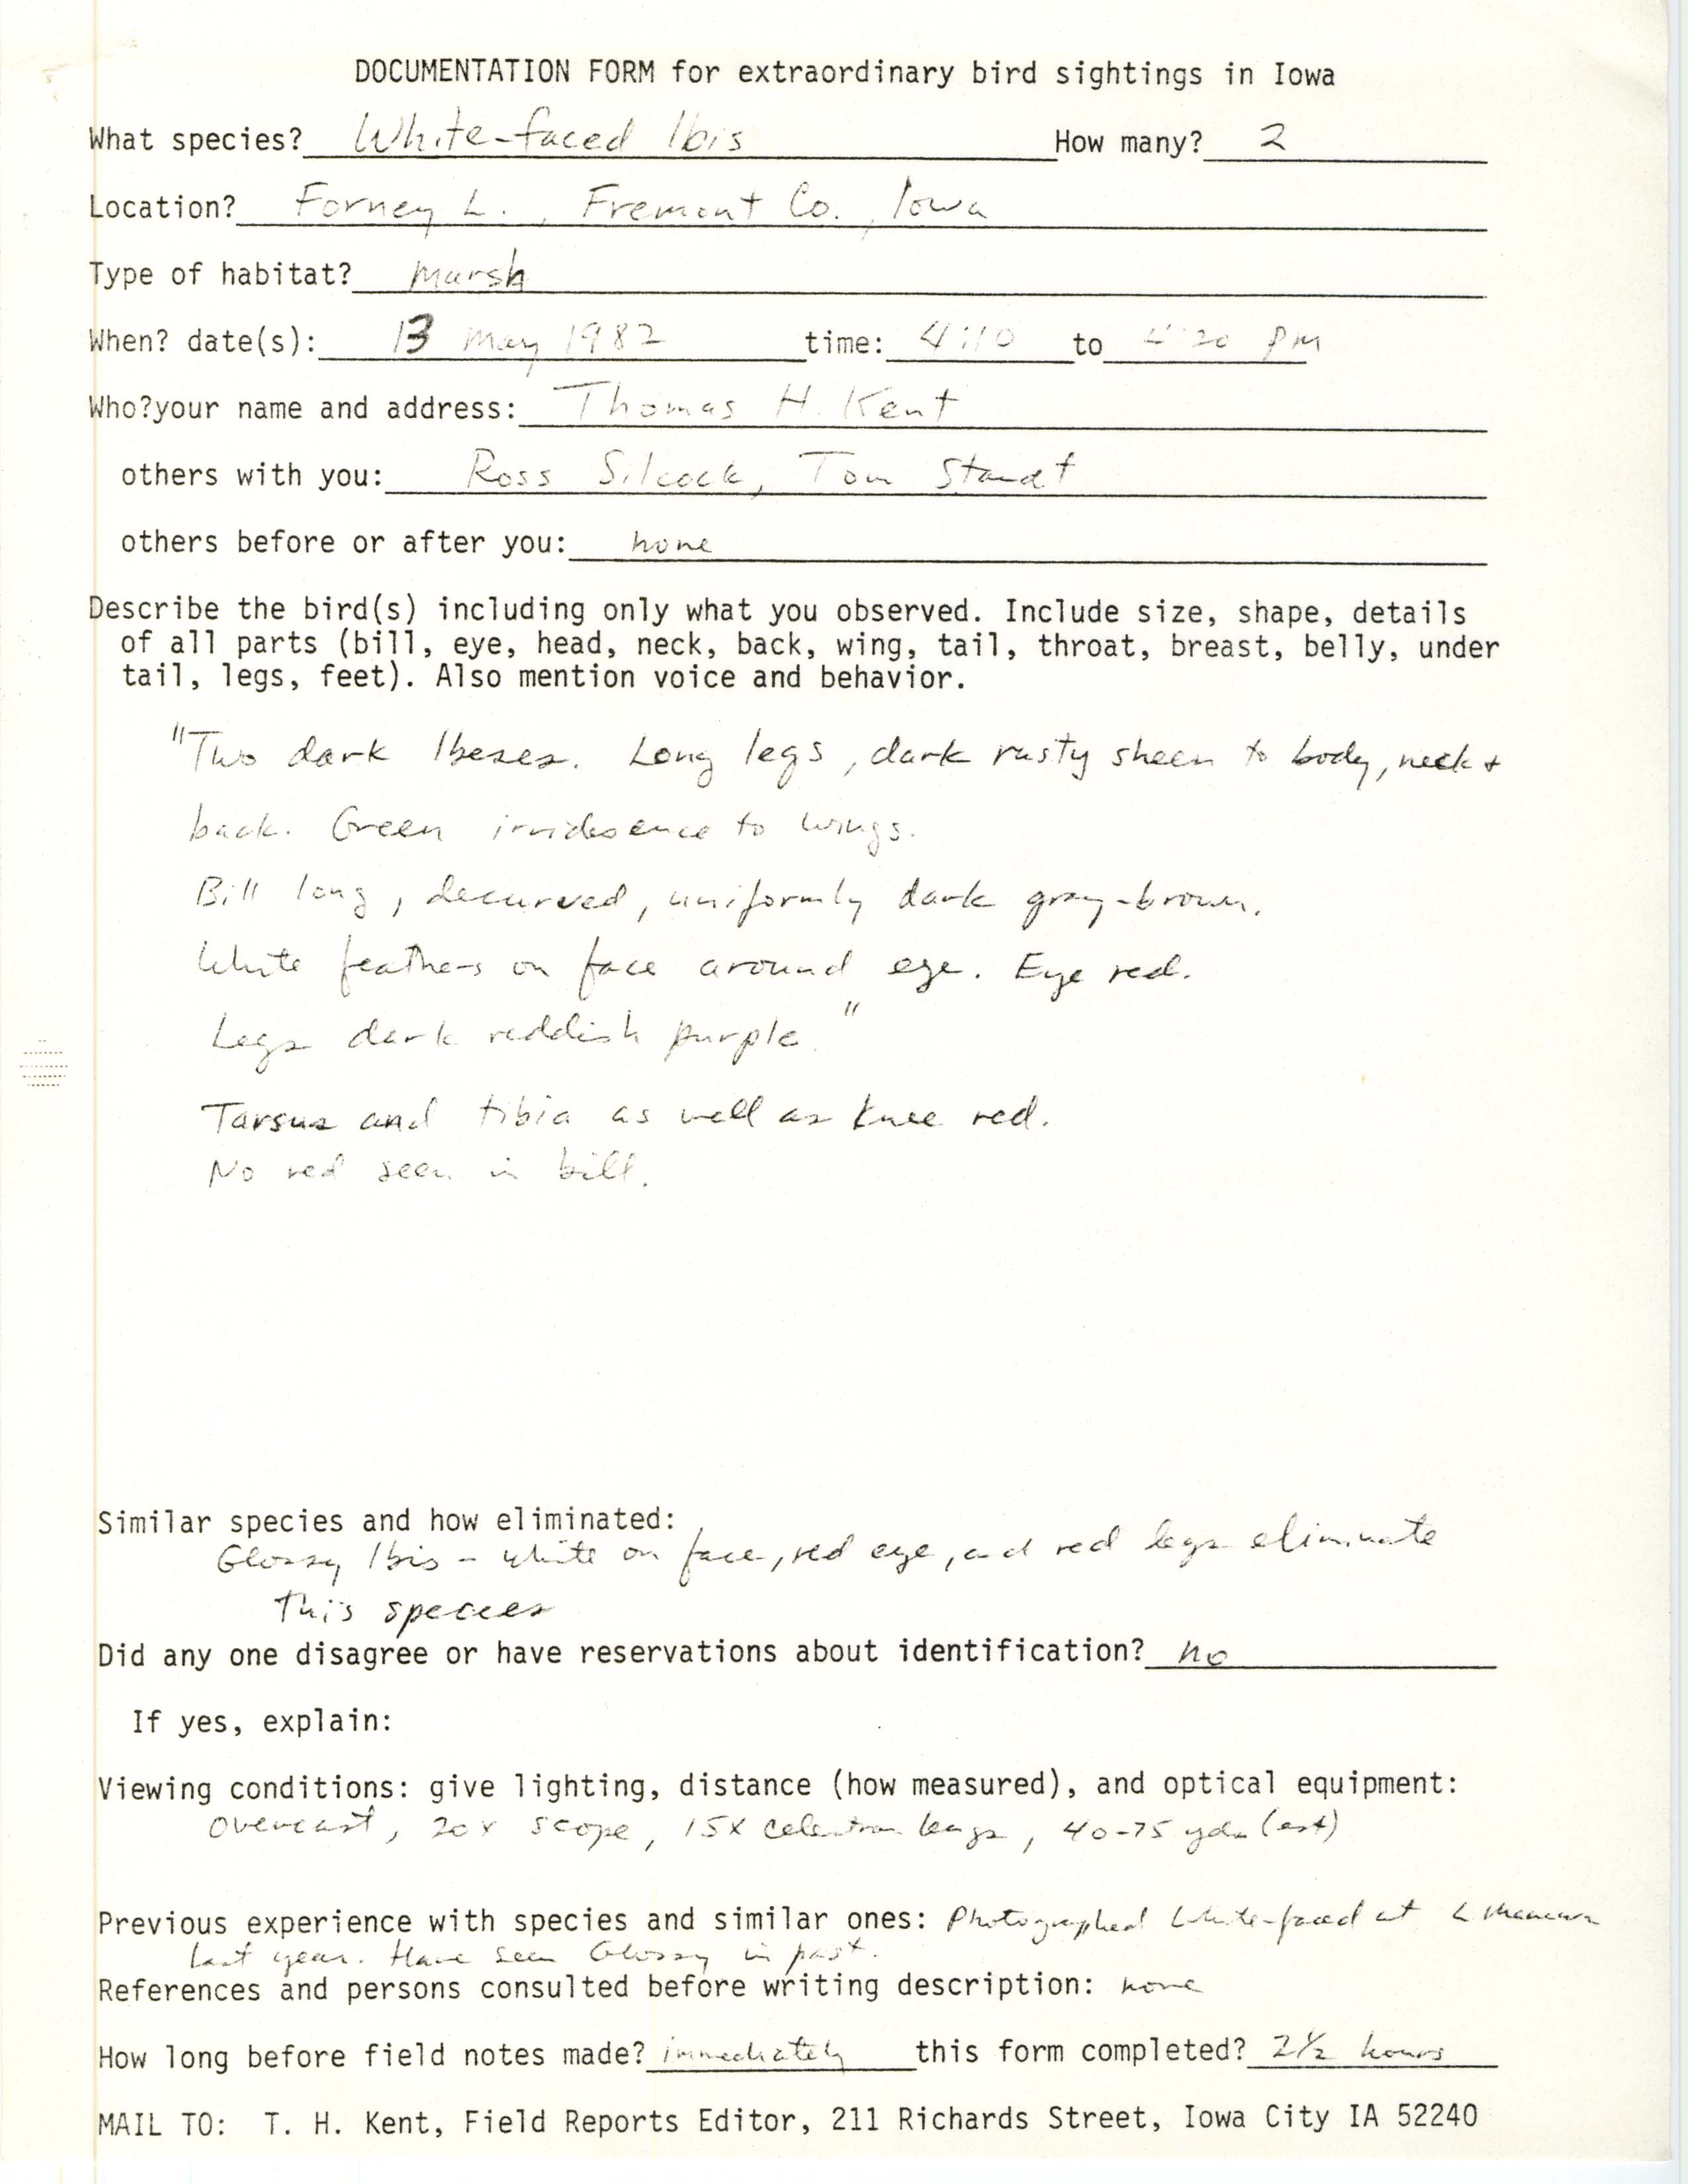 Rare bird documentation form for White-faced Ibis at Forneys Lake, 1982